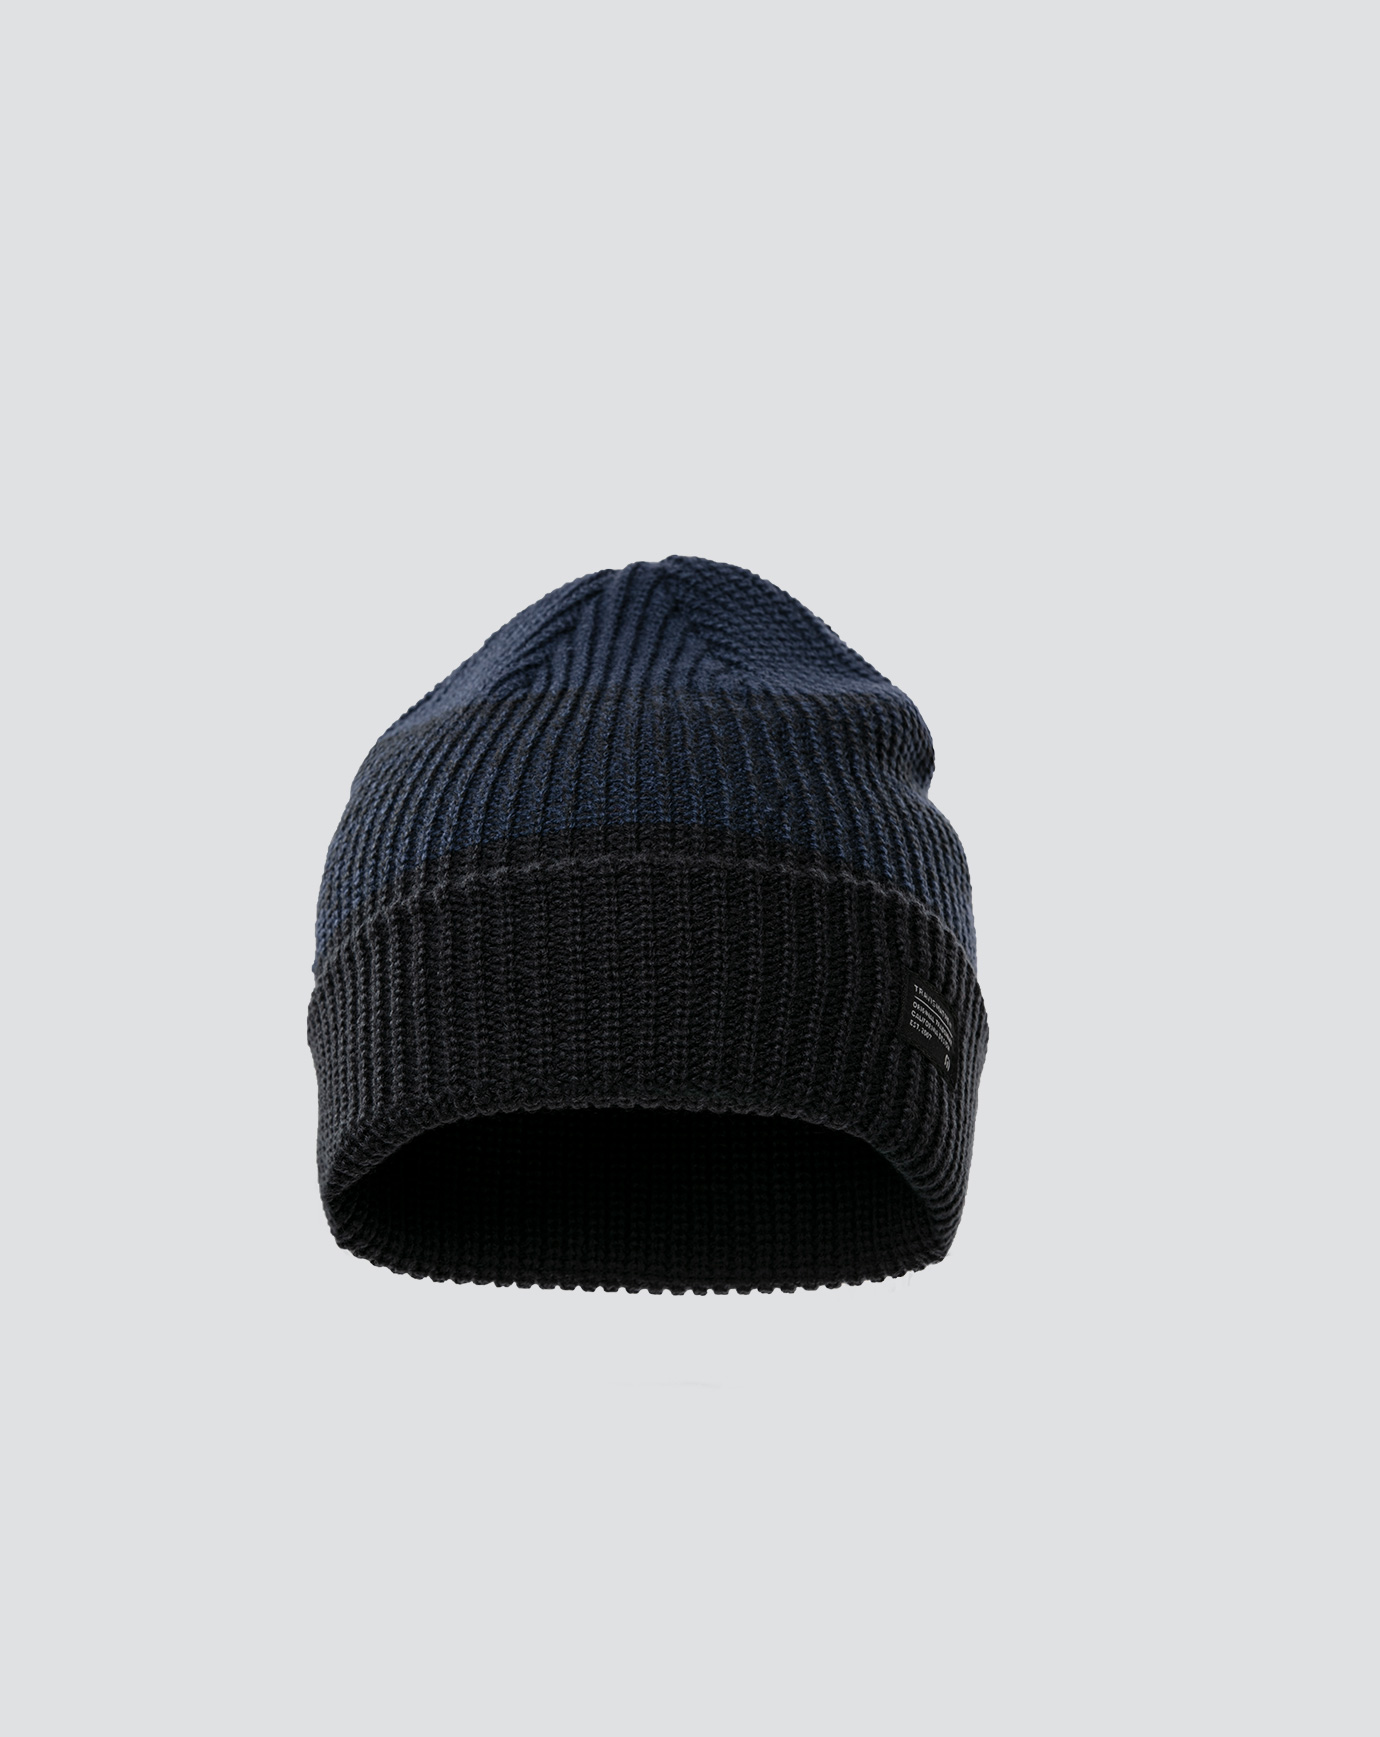 PREVAILING WINDS BEANIE 1